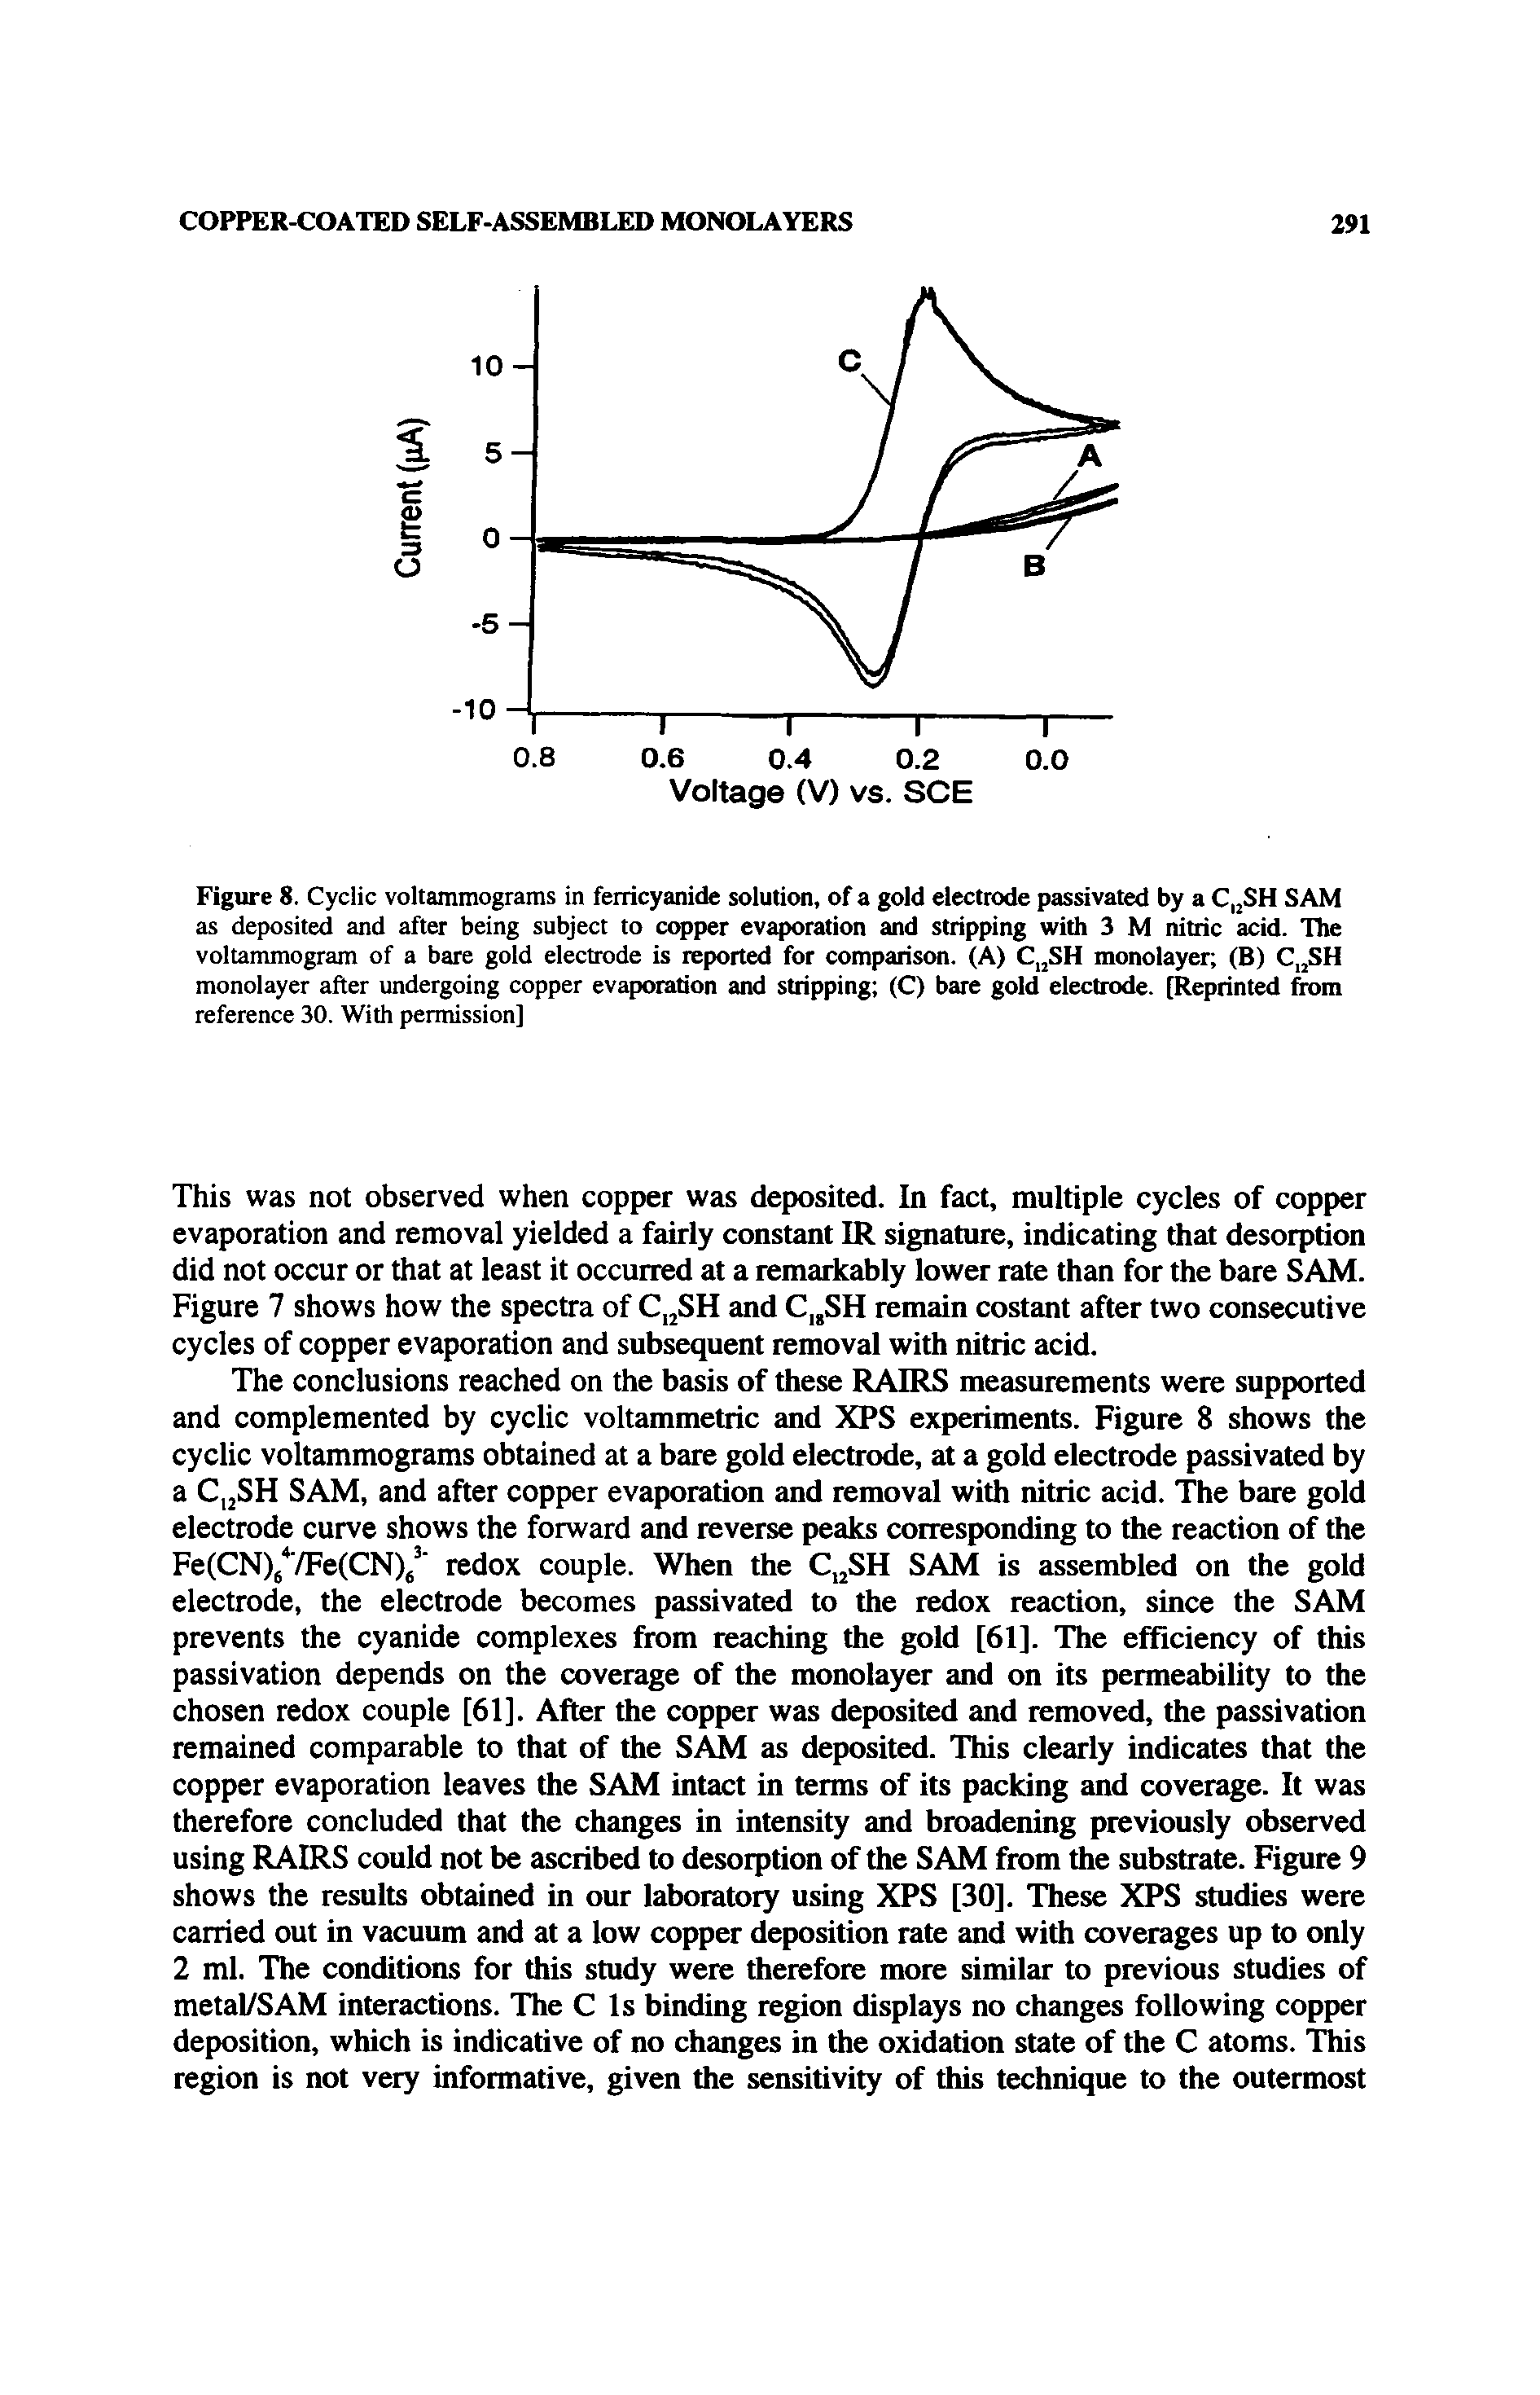 Figure 8. Cyclic voltammograms in ferricyanide solution, of a gold electrode passivated by a C SH SAM as deposited and after being subject to copper evaporation and stripping with 3 M nitric acid. The voltammogram of a bare gold electrode is reported for comparison. (A) C SH monolayer, (B) C SH monolayer after undergoing copper evaporation and stripping (O bare gold electrode. [Reprinted tom...